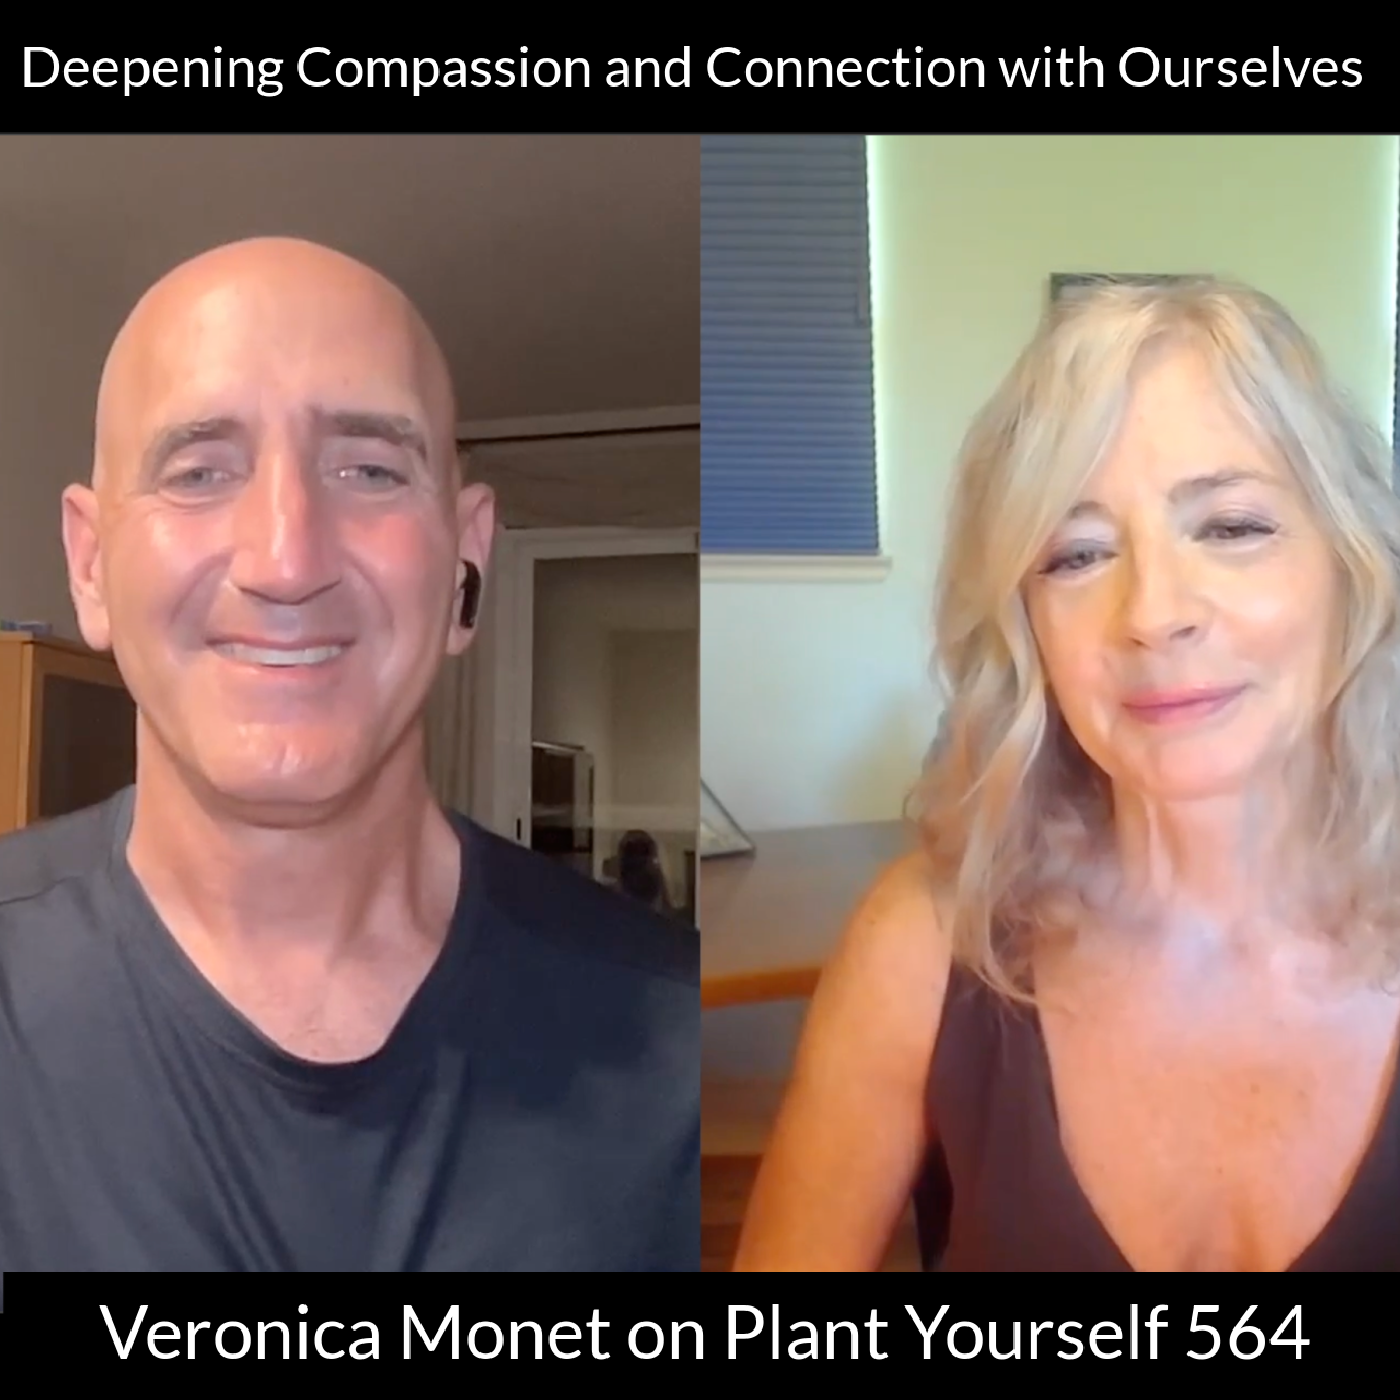 Deepening Compassion and Connection with Ourselves: Veronica Monet on PYP 564